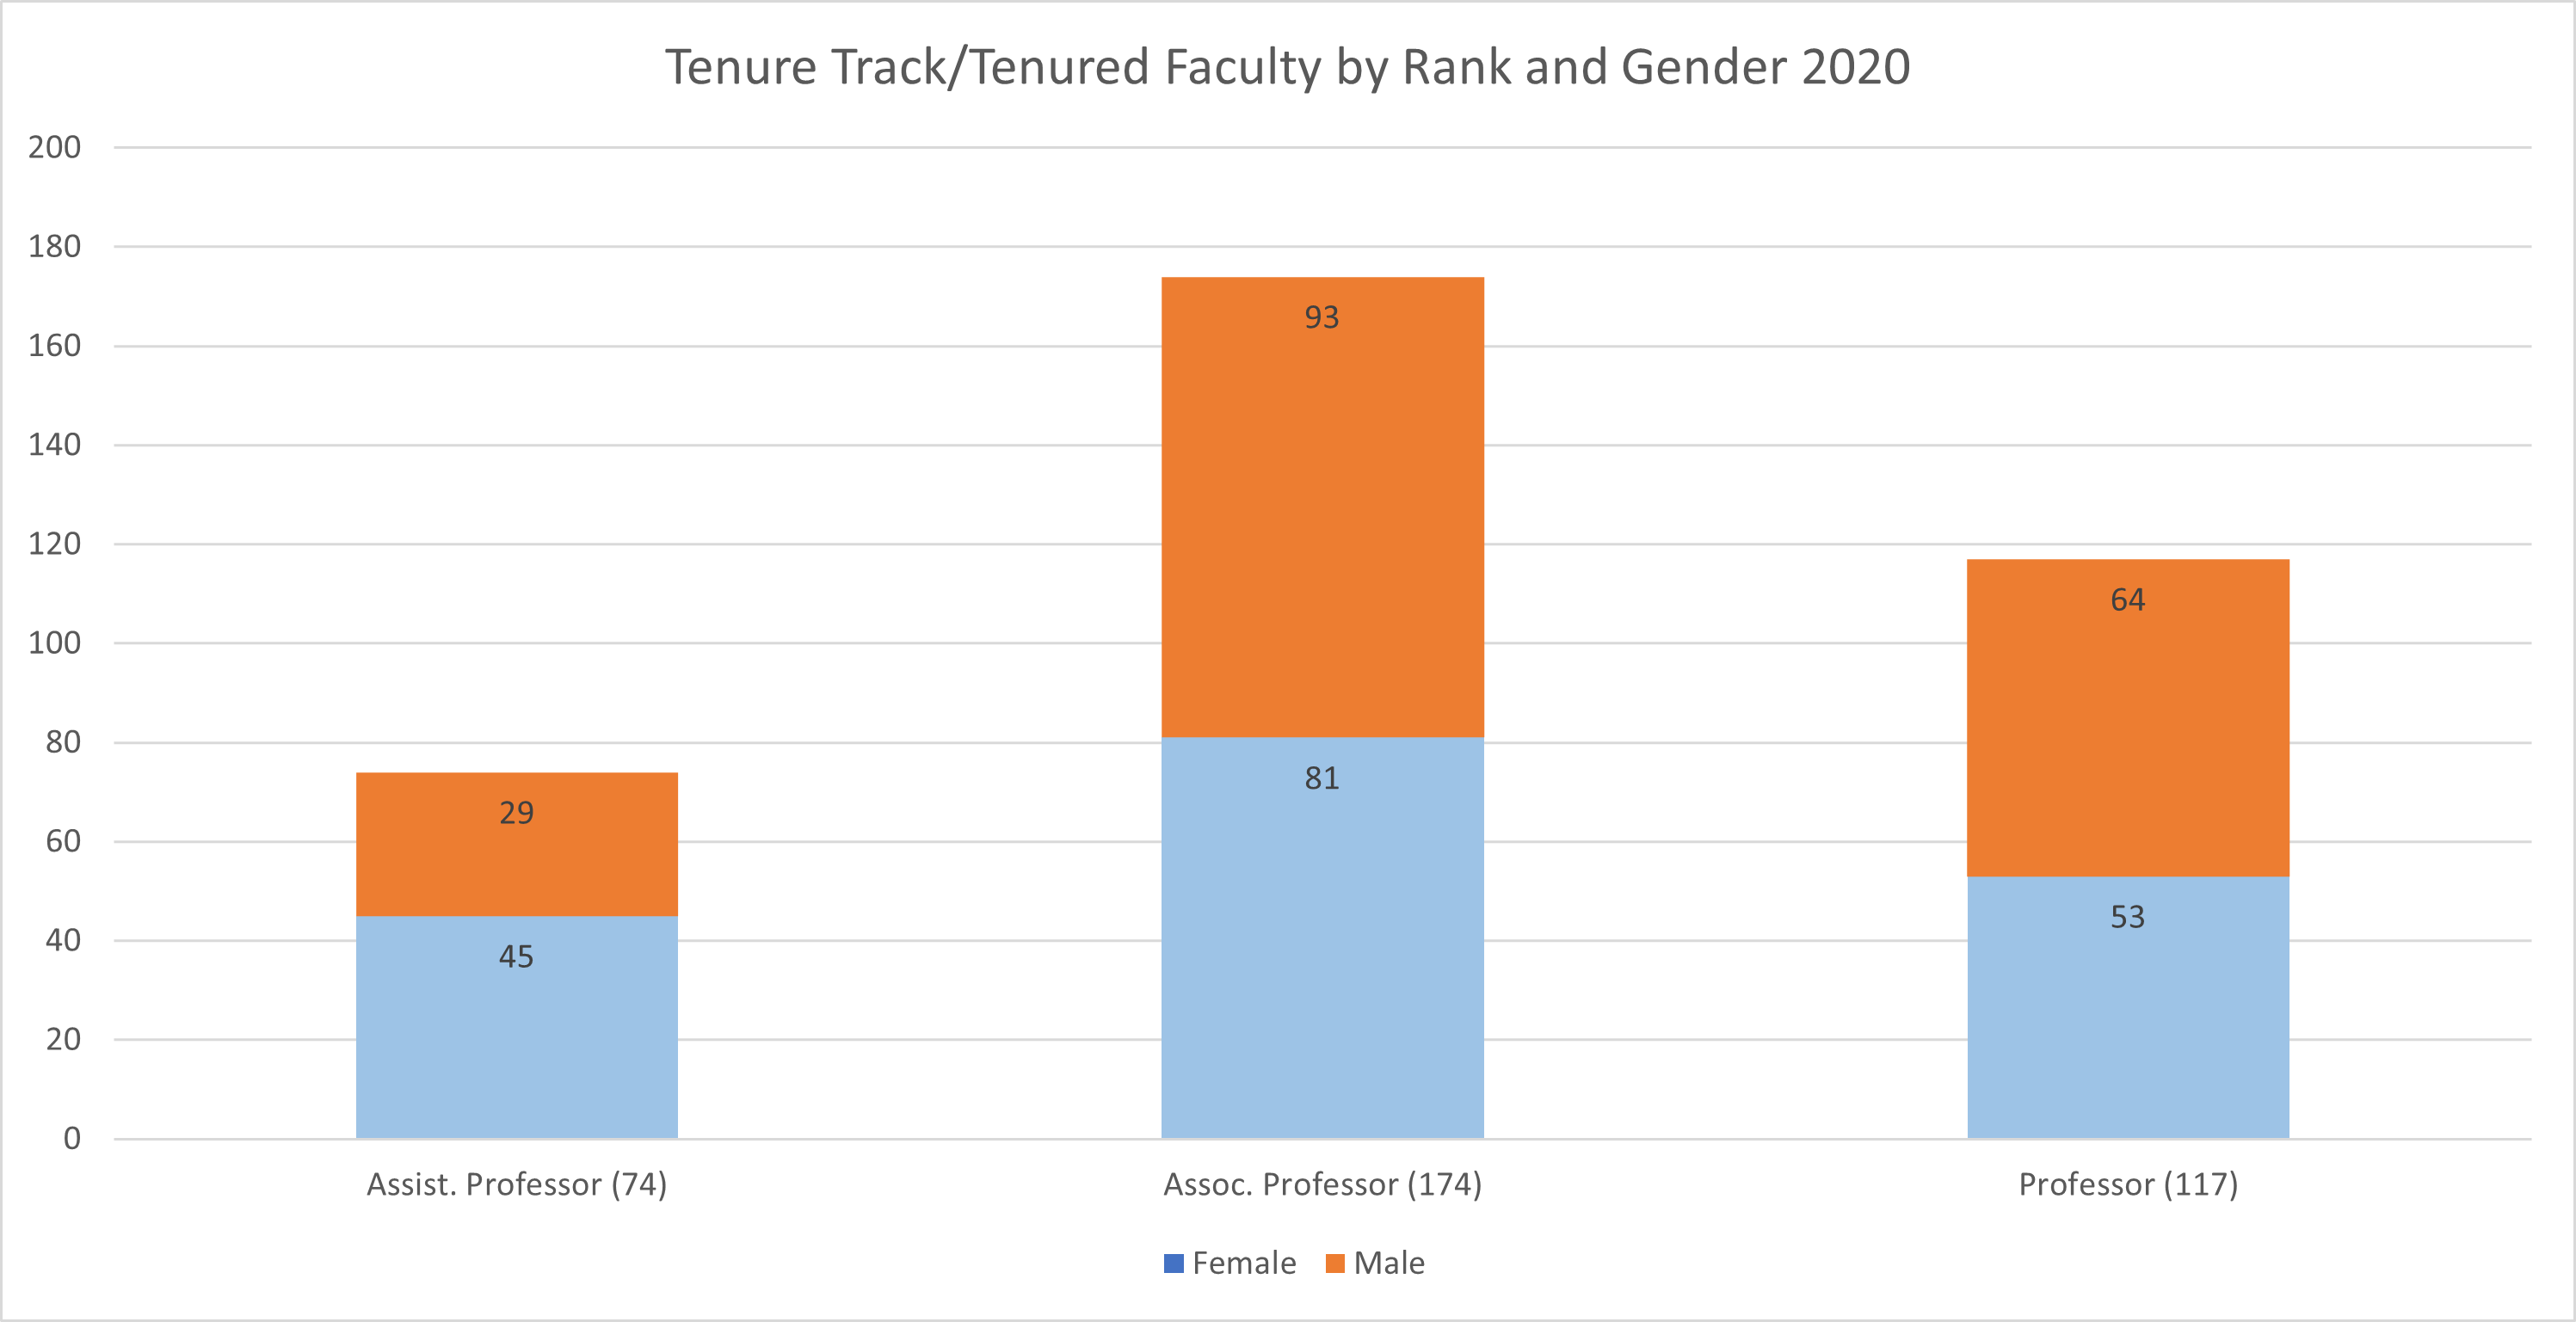 Graph of Tenure Track/ Tenured Faculty by Rank and Gender 2020